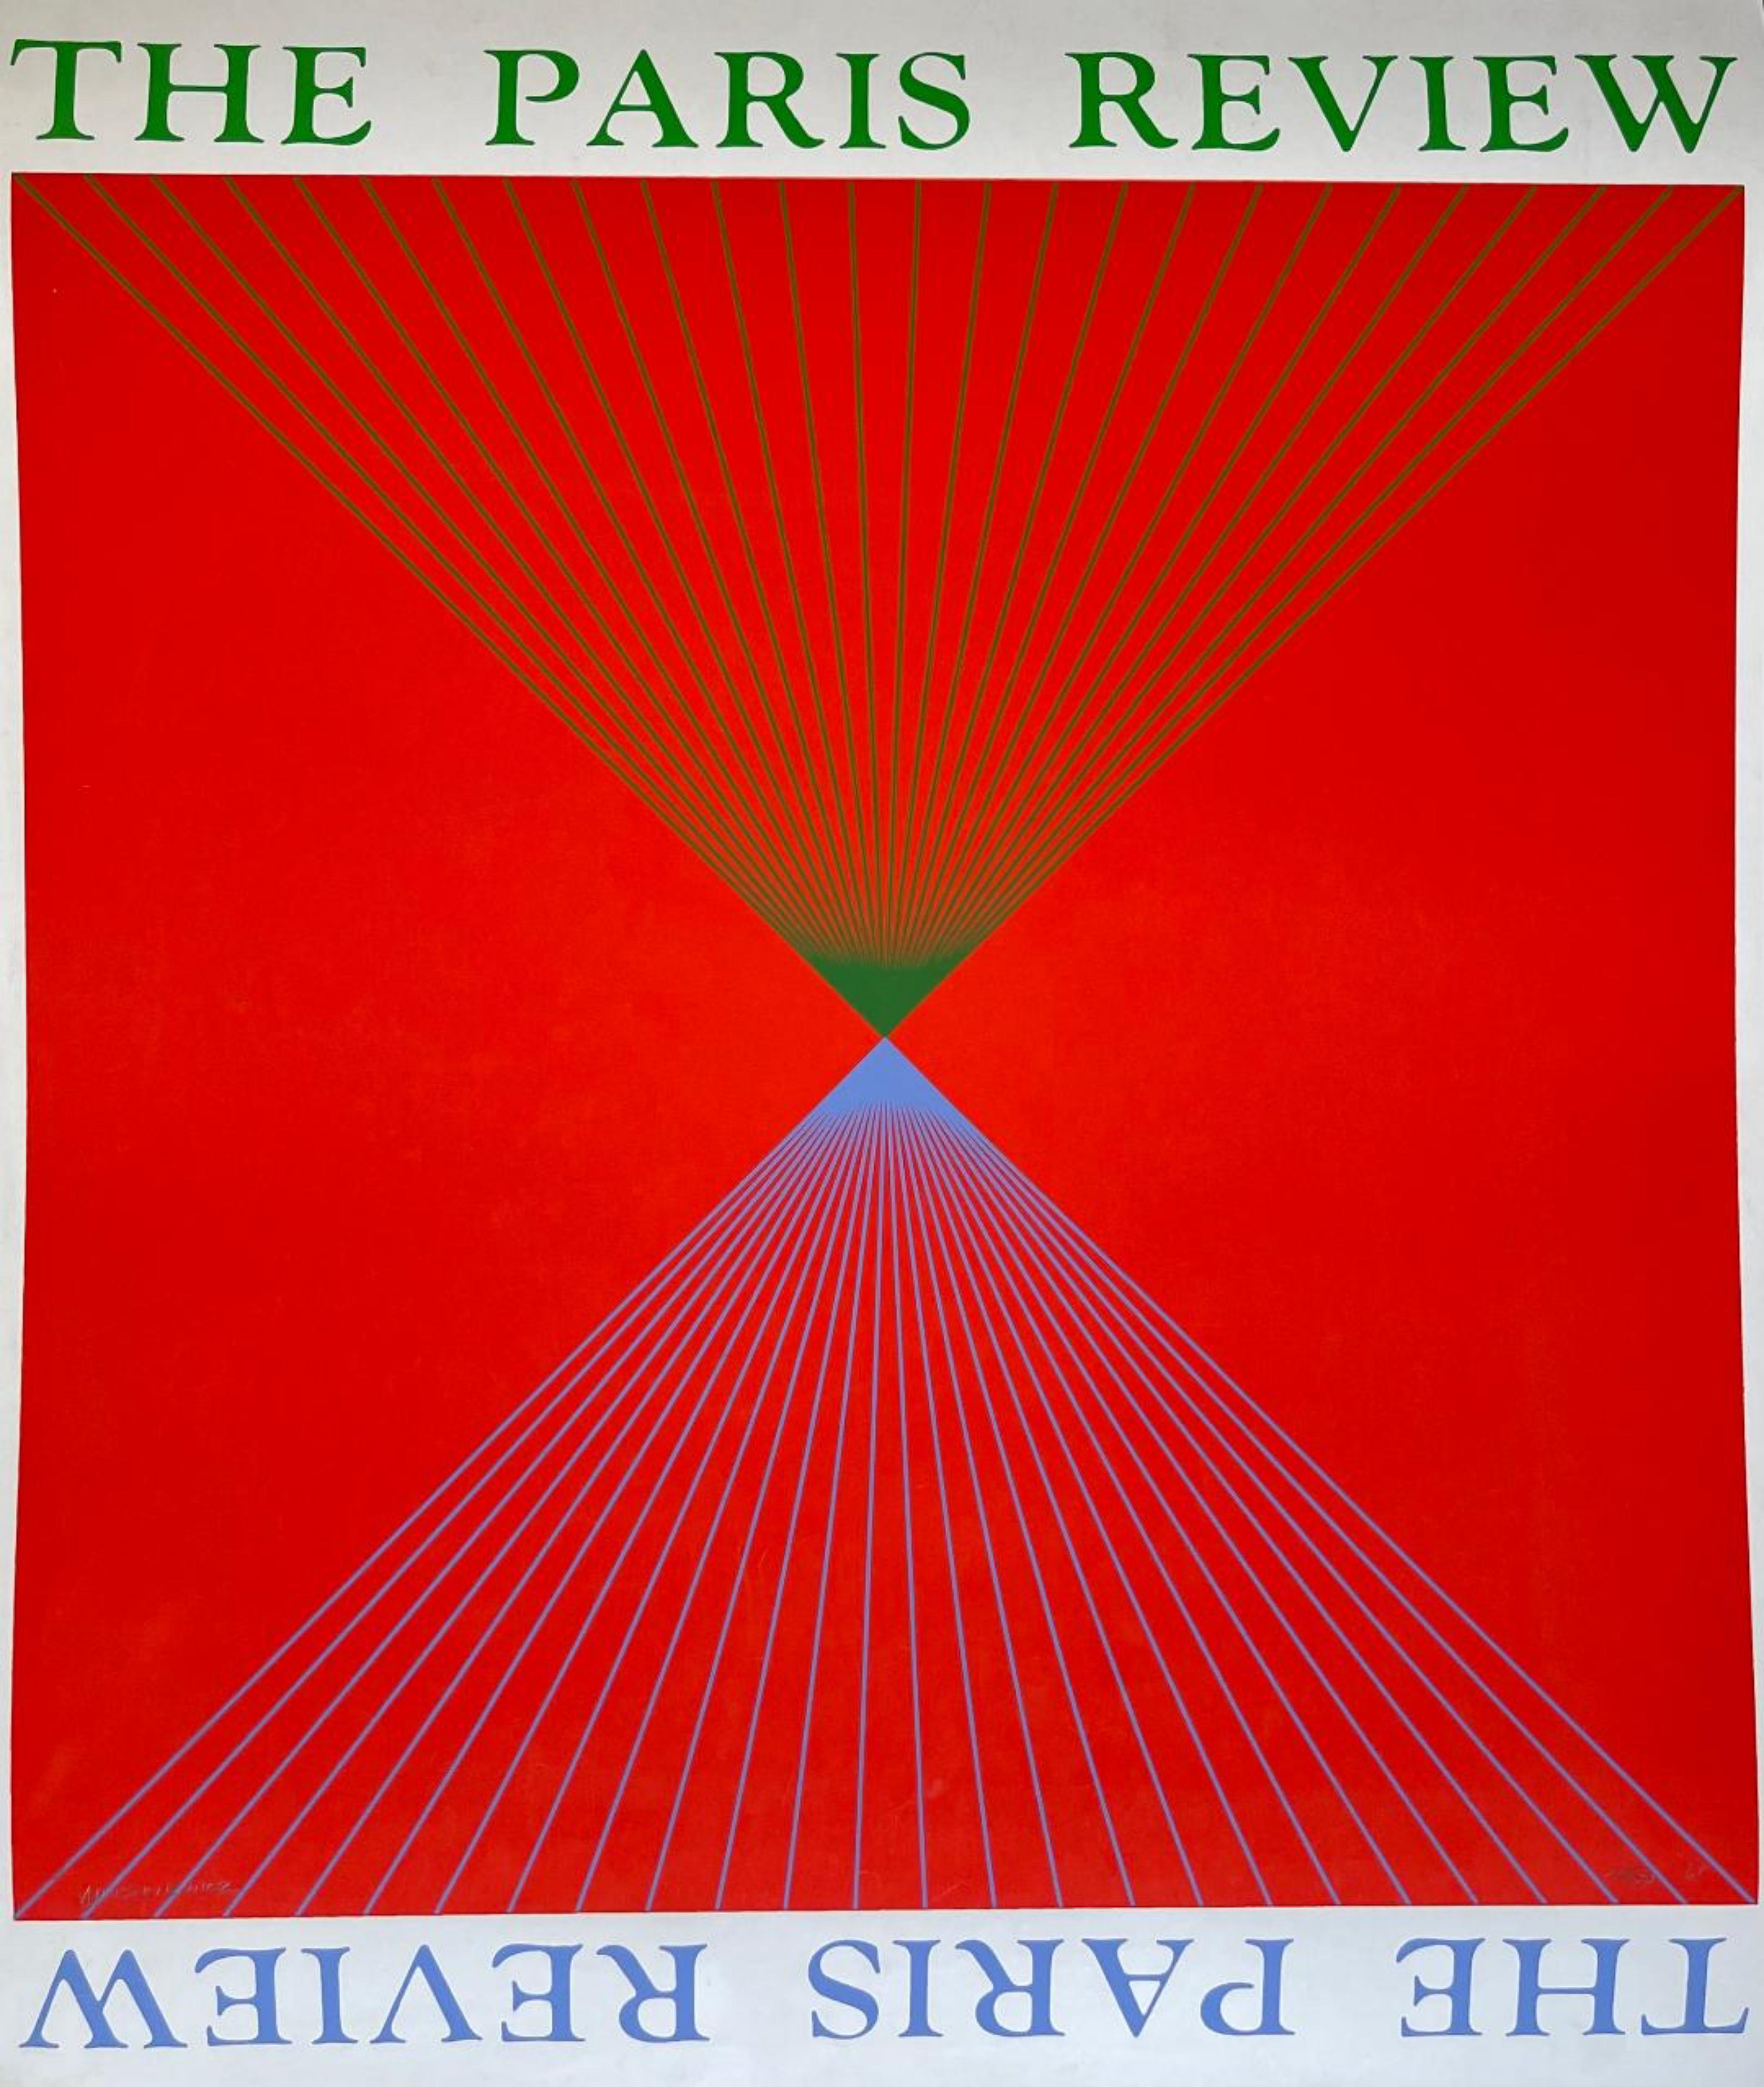 Richard Anuszkiewicz Abstract Print - The Paris Review, signed and numbered 1960s Op Art geometric abstraction print 